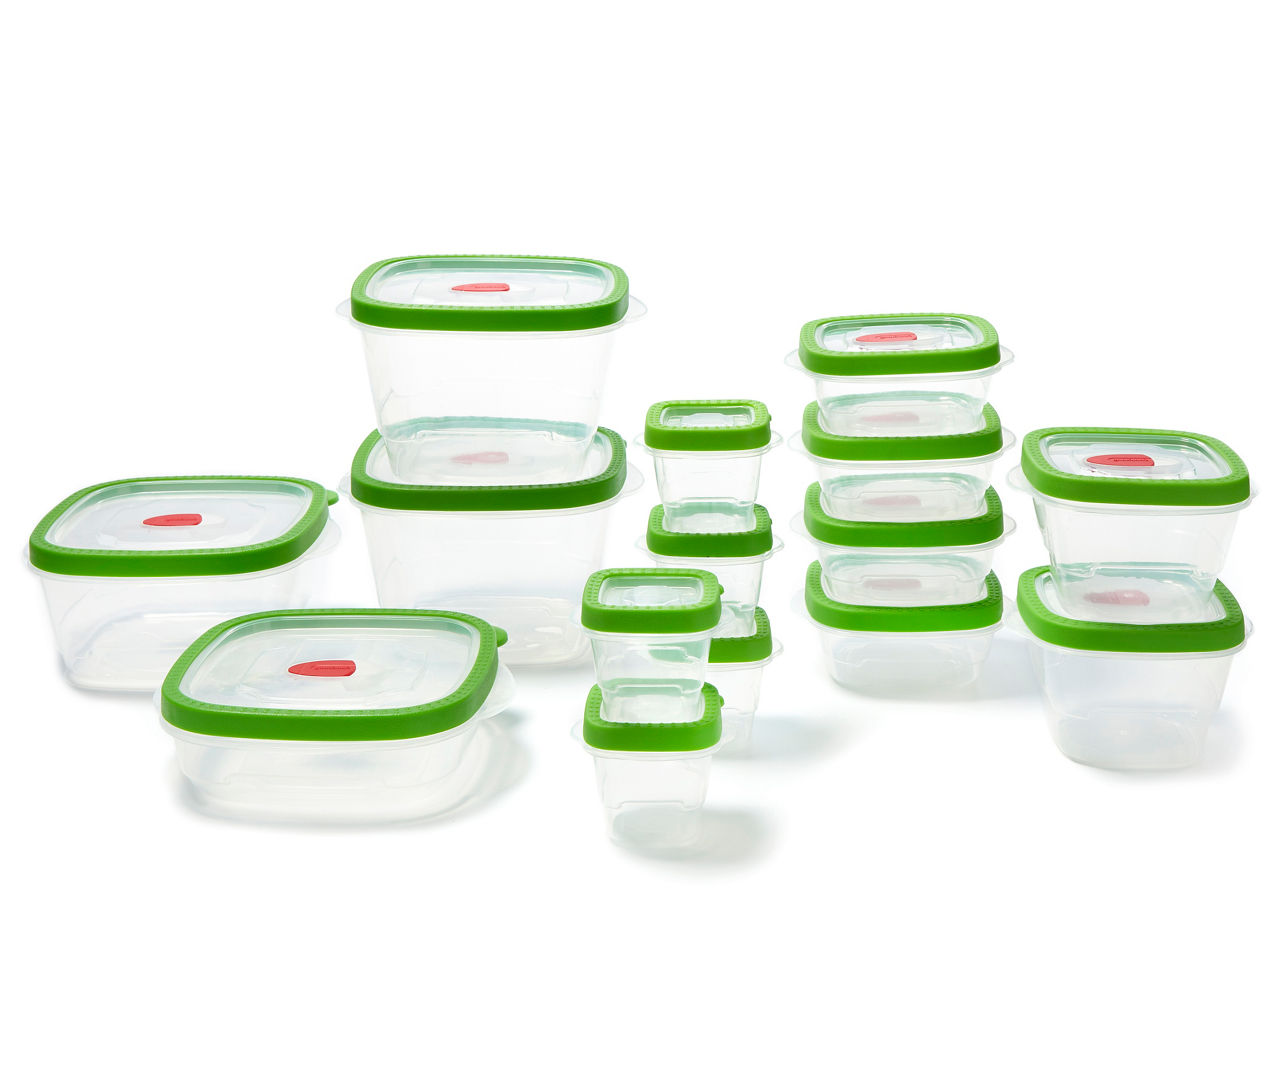 Rubbermaid Take Alongs Meal Prep Containers, 30 pc - Fry's Food Stores